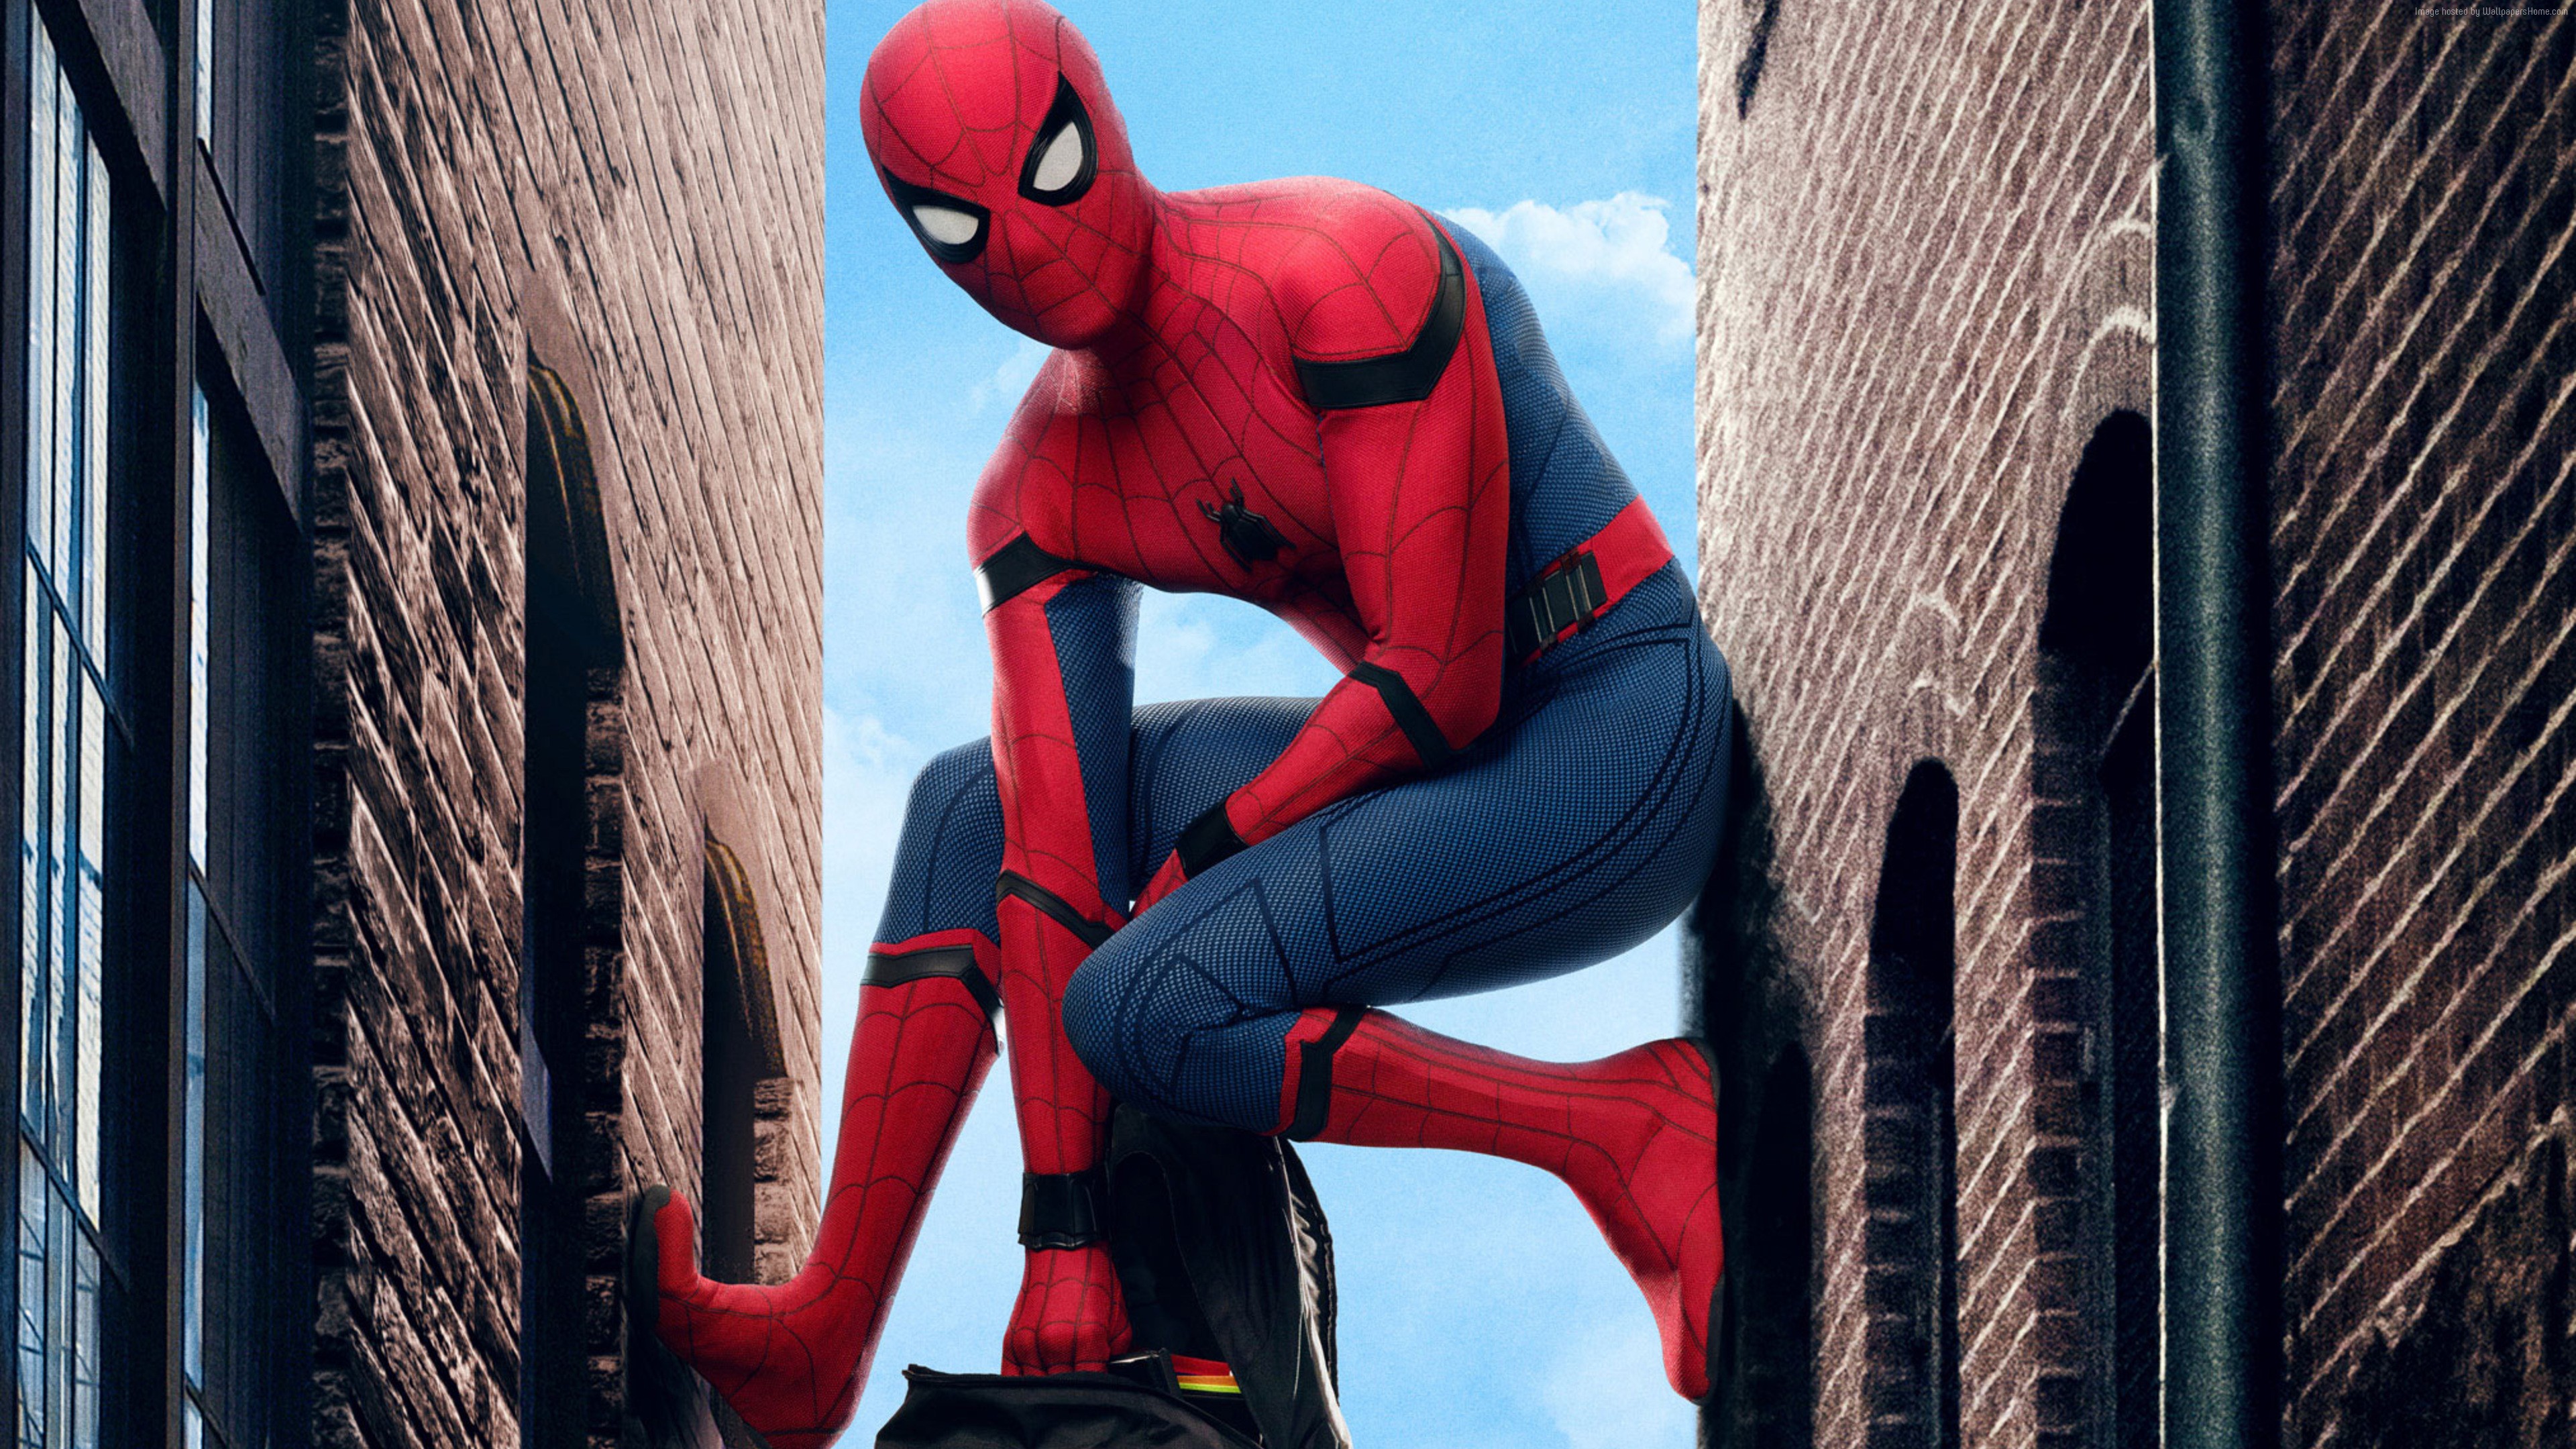 Featured image of post Spiderman Homecoming Wallpaper 4K We ve gathered over million pictures uploaded by our users and sorted them if you ve got your own one simply send us the spiderman homecoming wallpapers 4k and that we can show it on the website